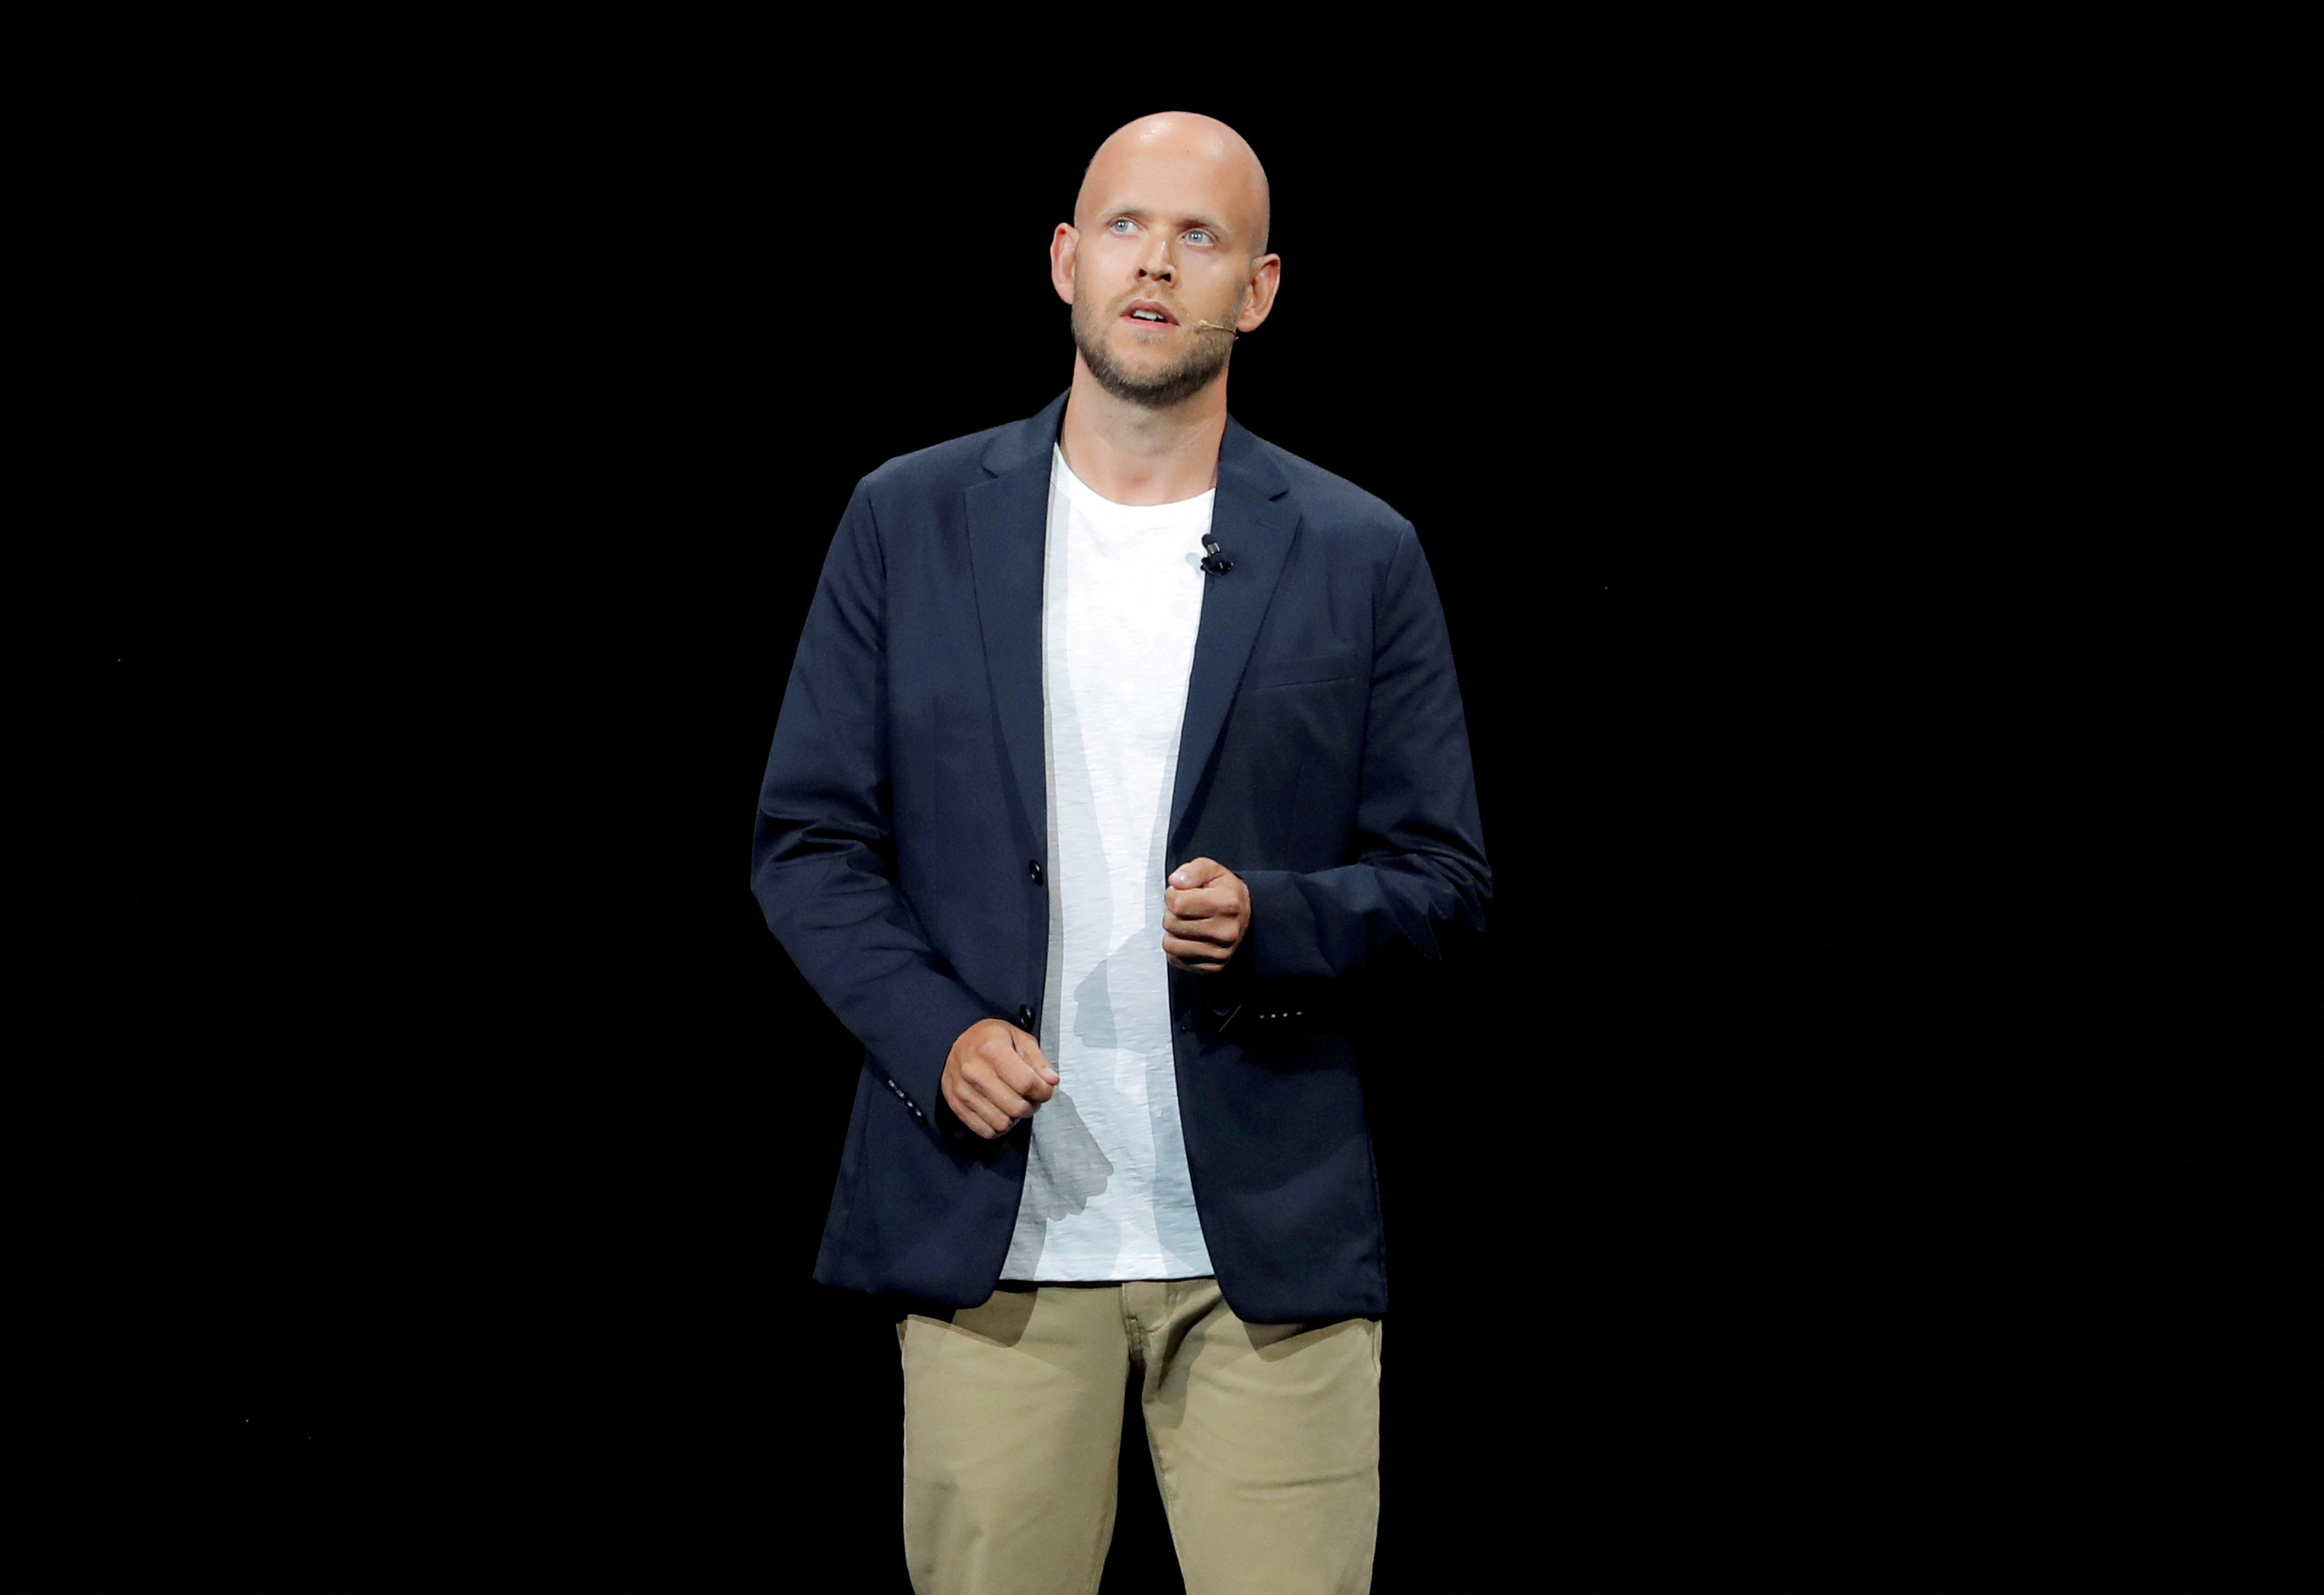 Daniel Ek, CEO of Spotify speaks at a Samsung product launch event in Brooklyn